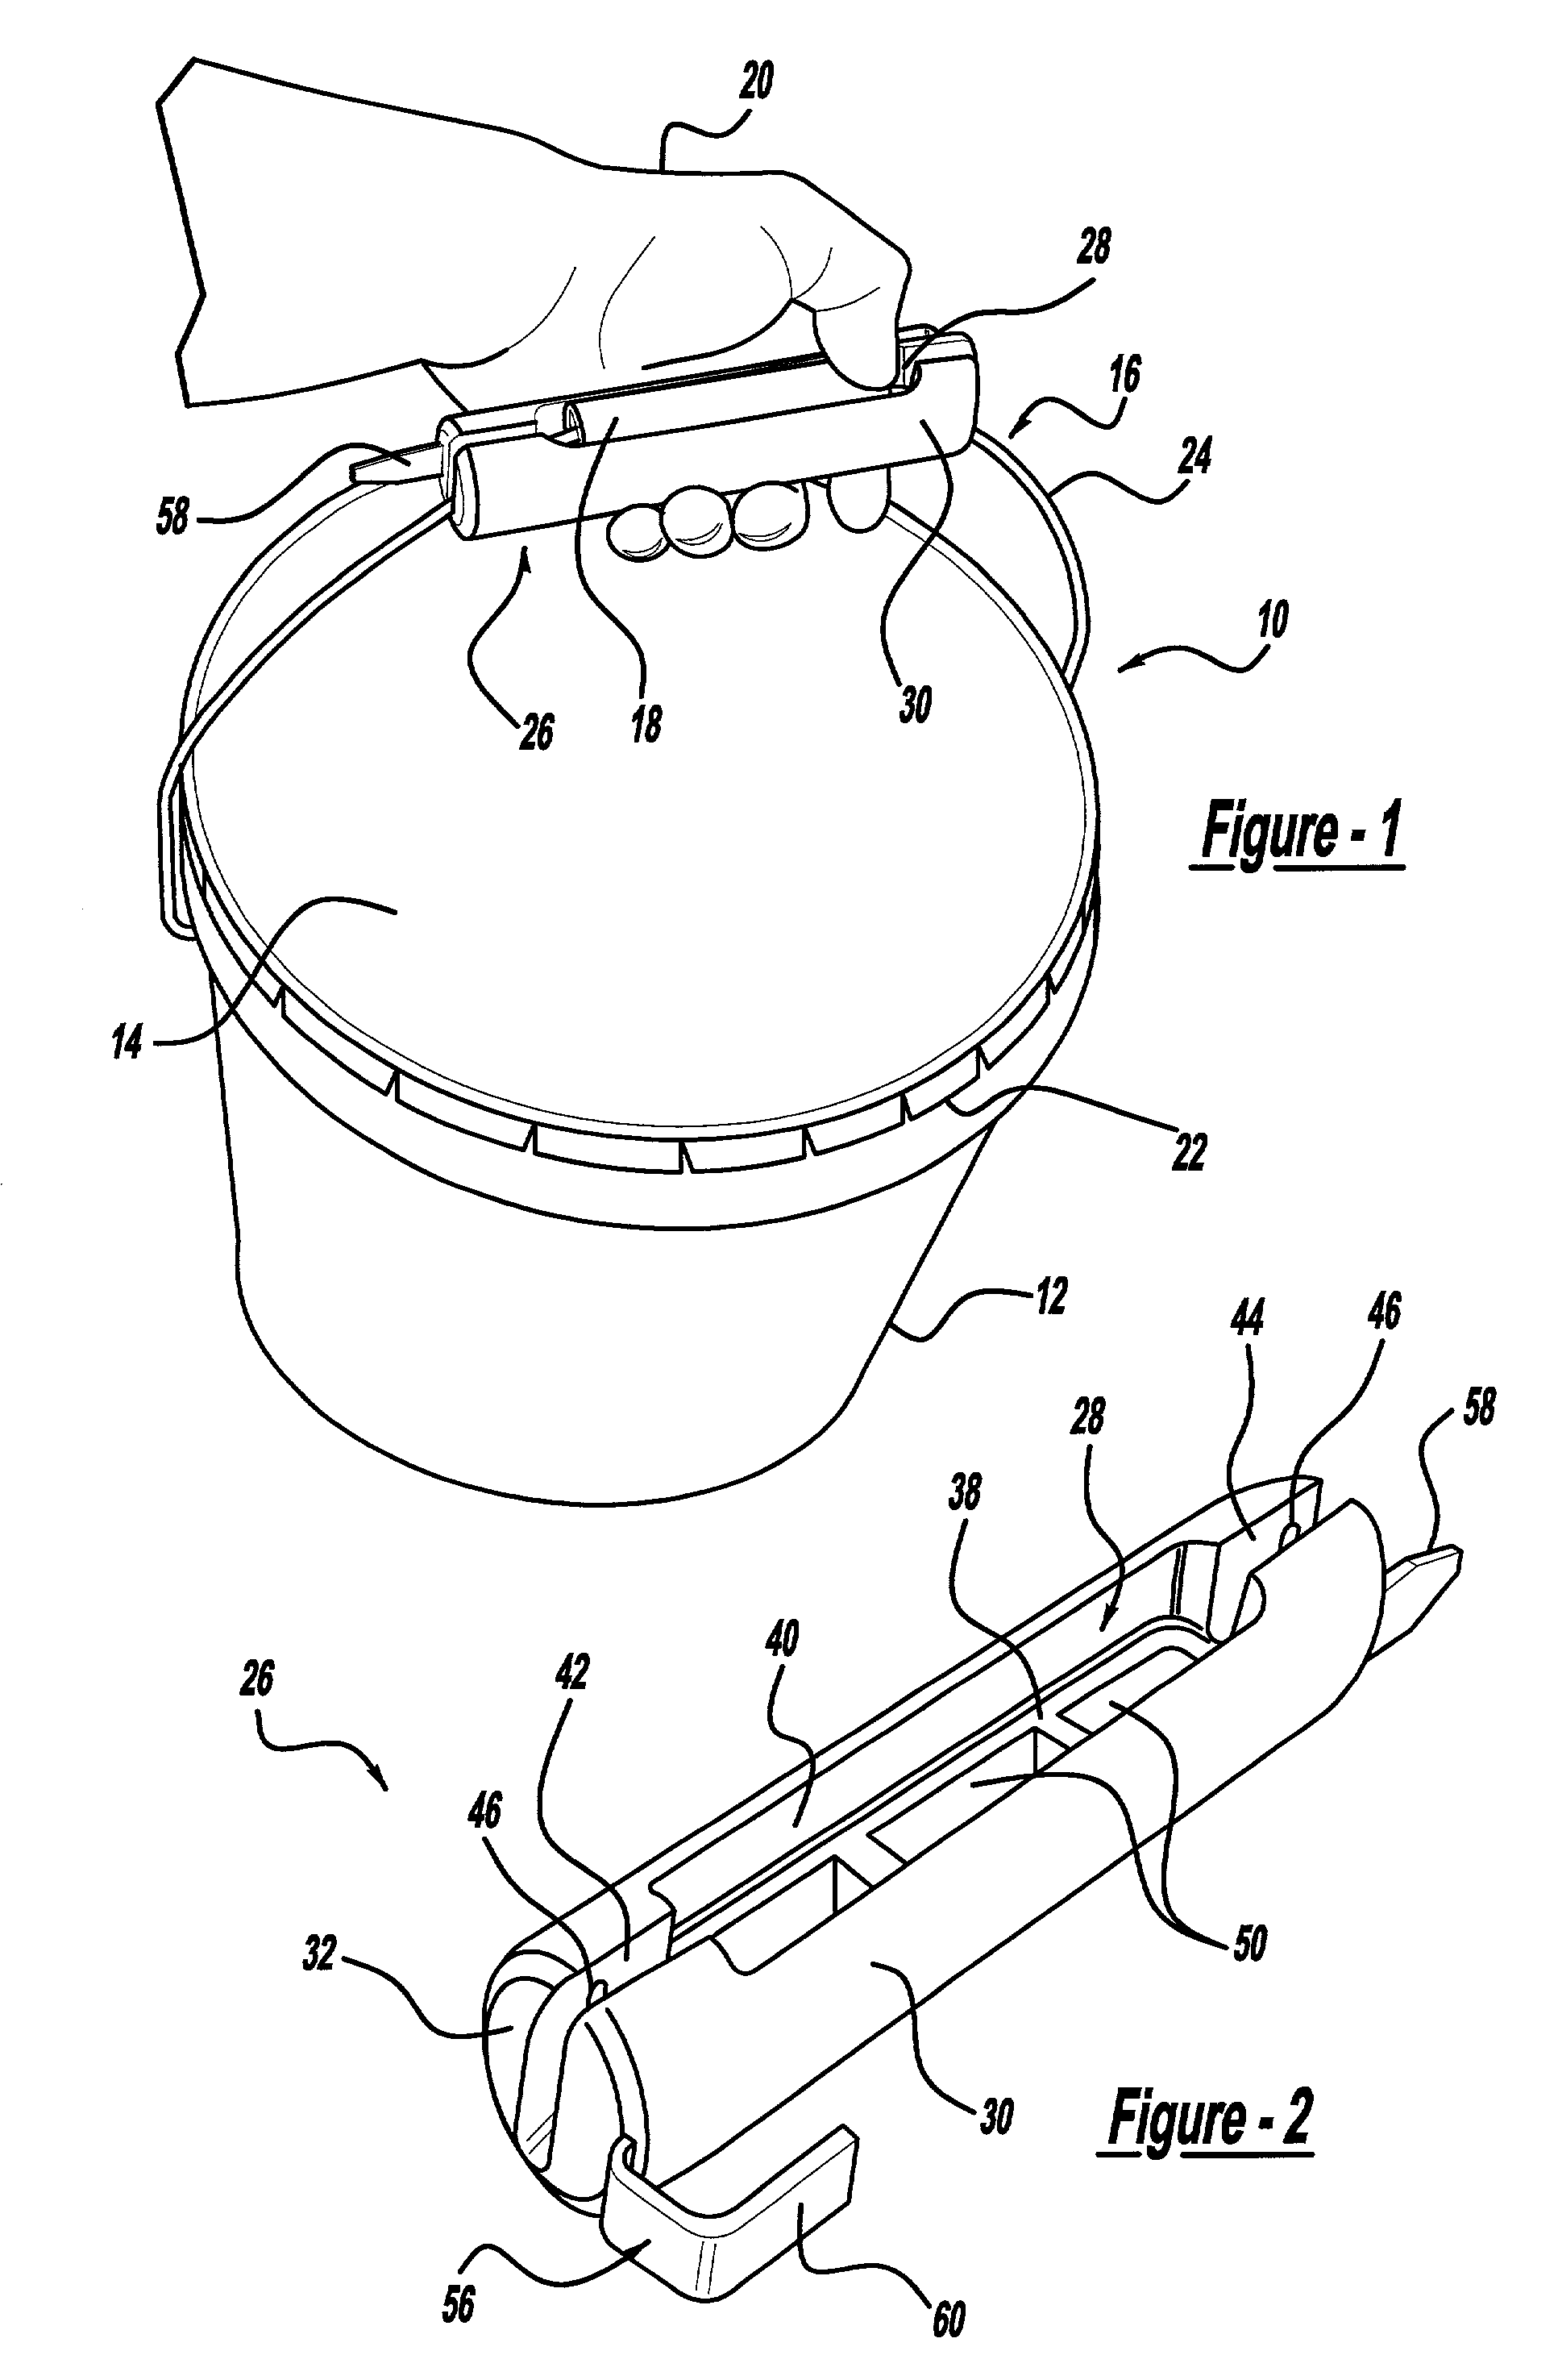 Removable grip for a bucket